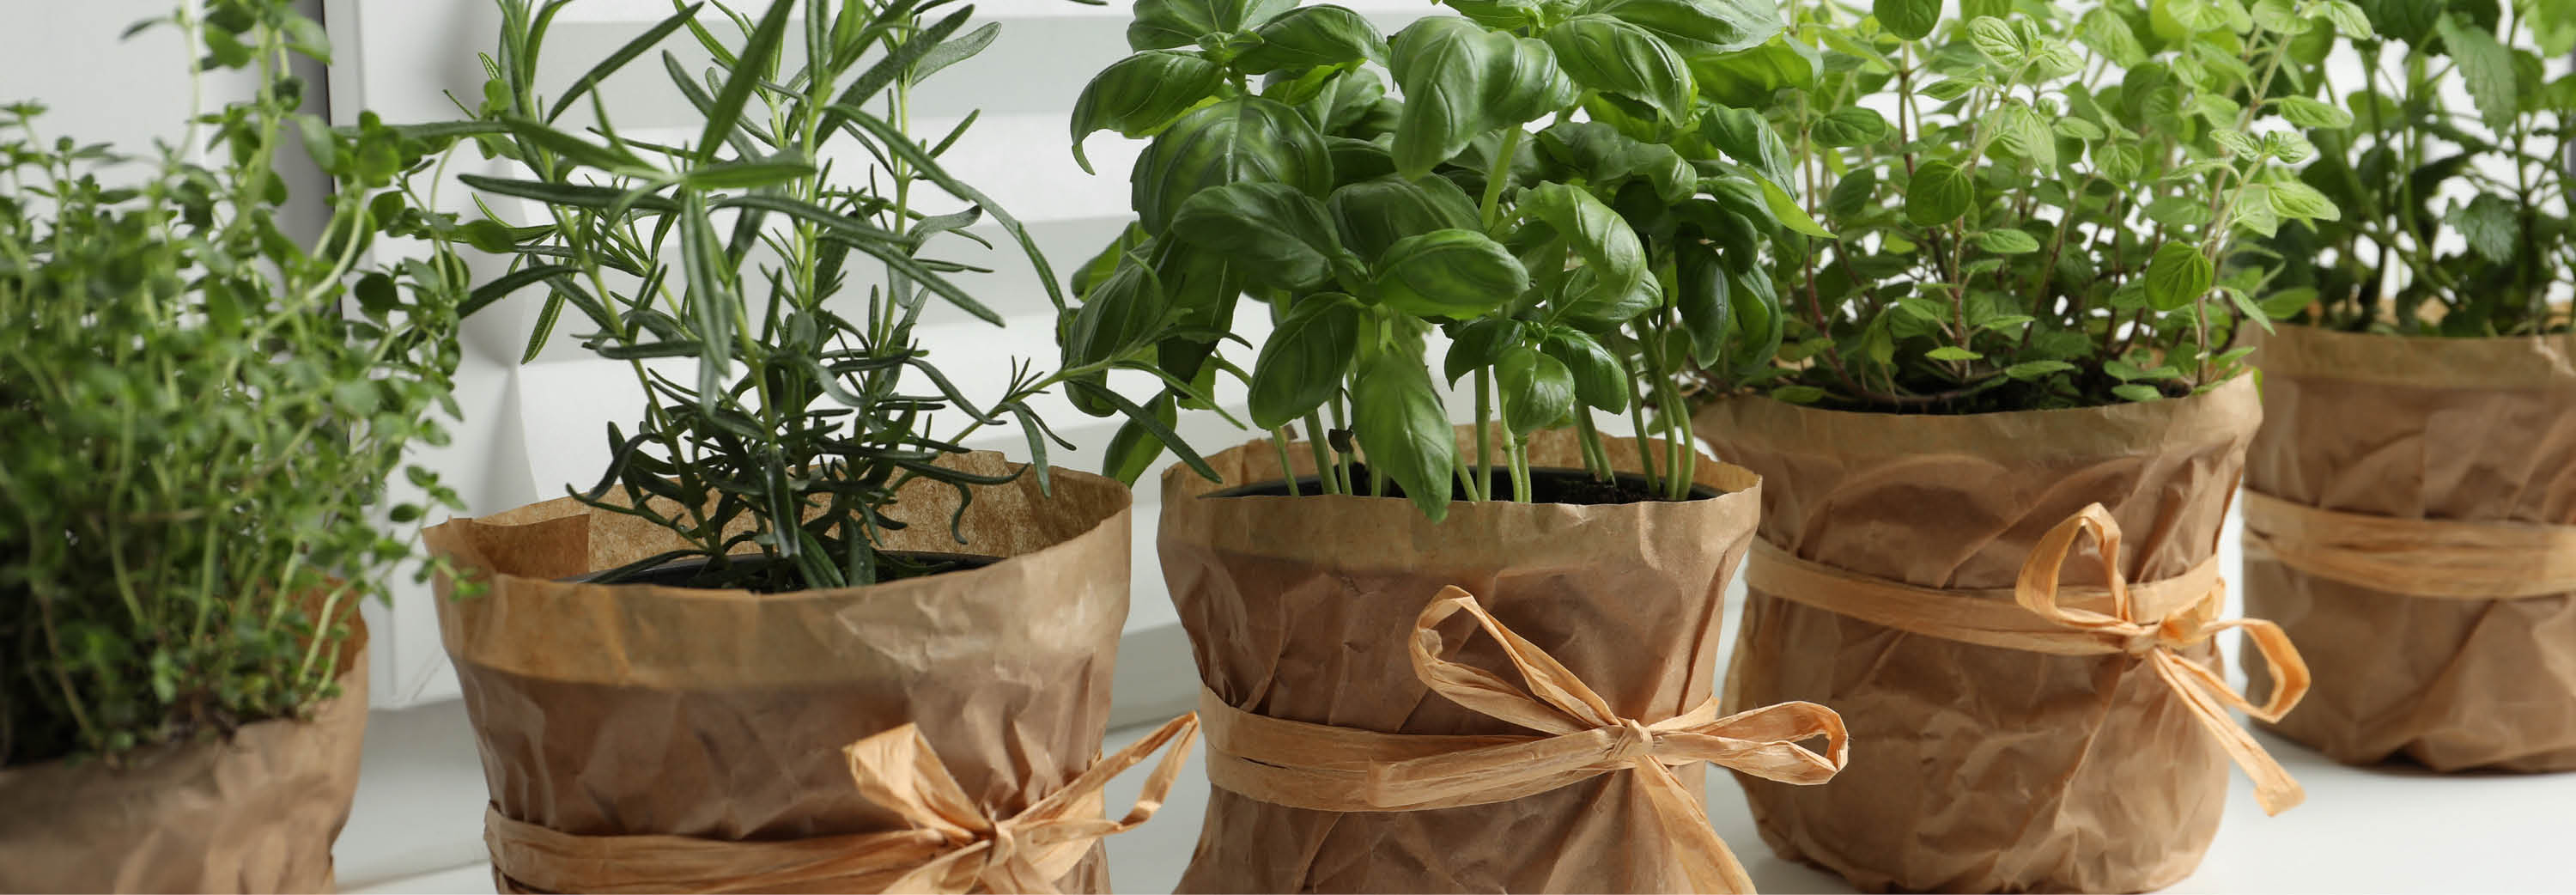 4 pots of herbs wrapped in brown paper and string